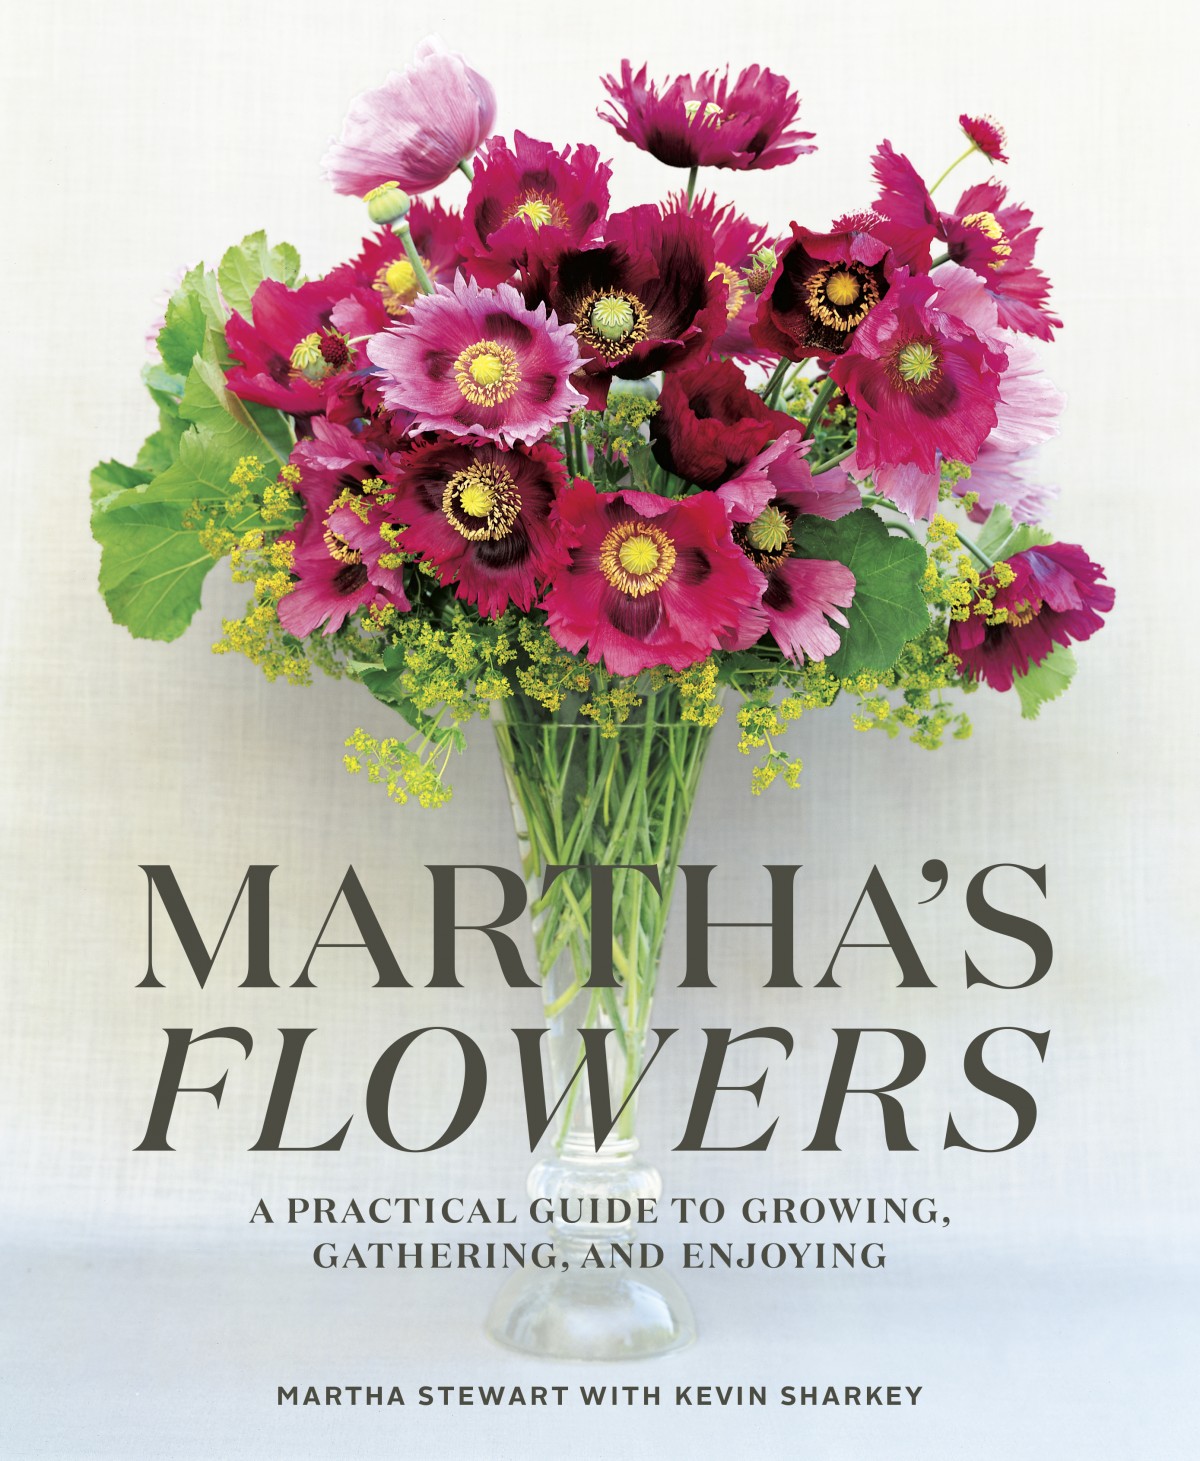 MARTHA'S FLOWERS cover with purple flowers.